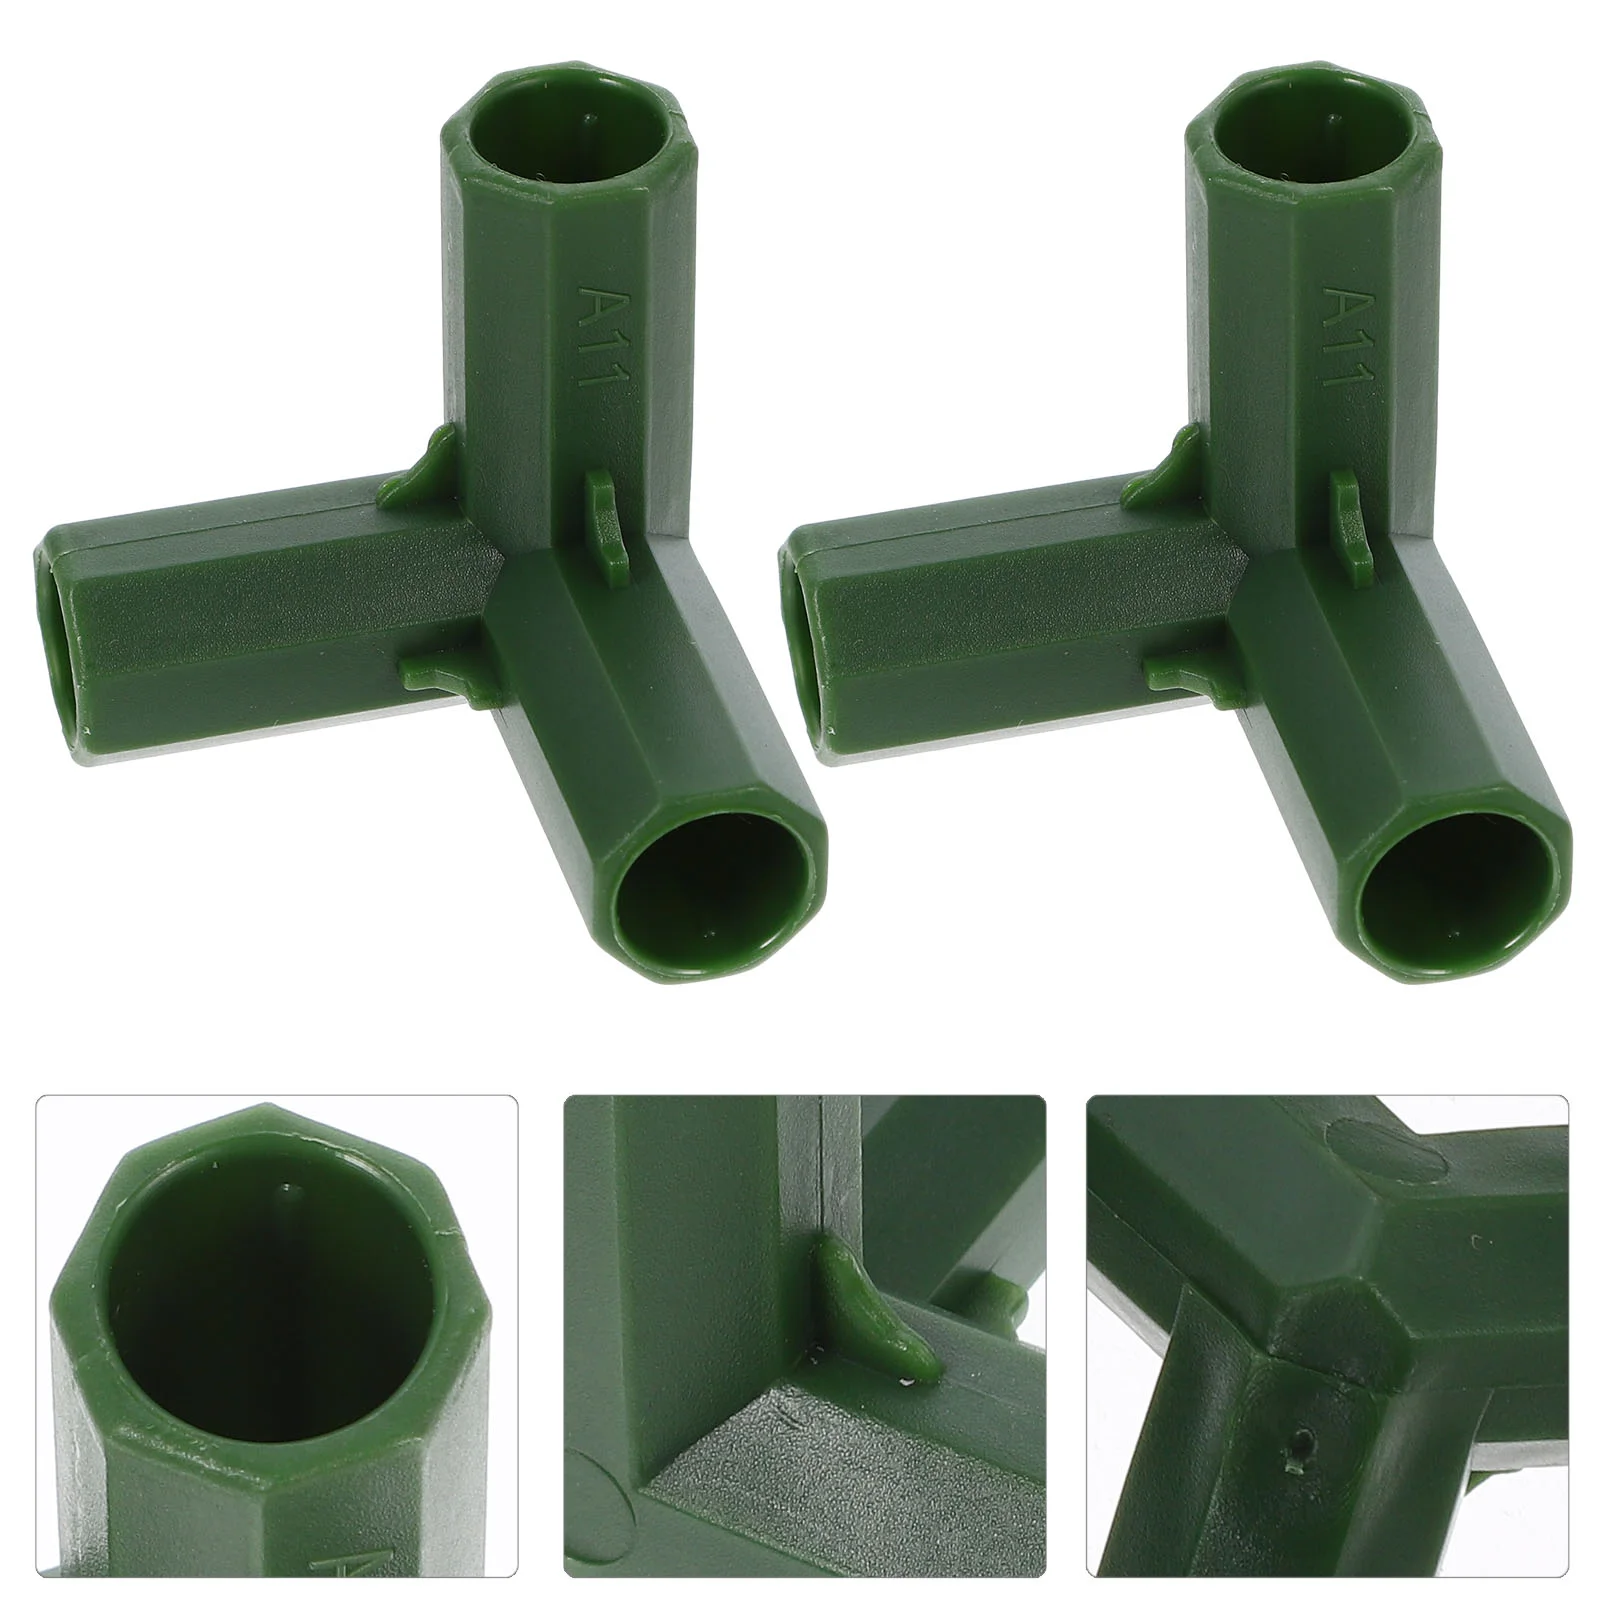 

8 Pcs Joints Tent Connection Bracket Canopy Fitting Elbow Connector Pipe Connectors Supports Greenhouse Replacement Parts